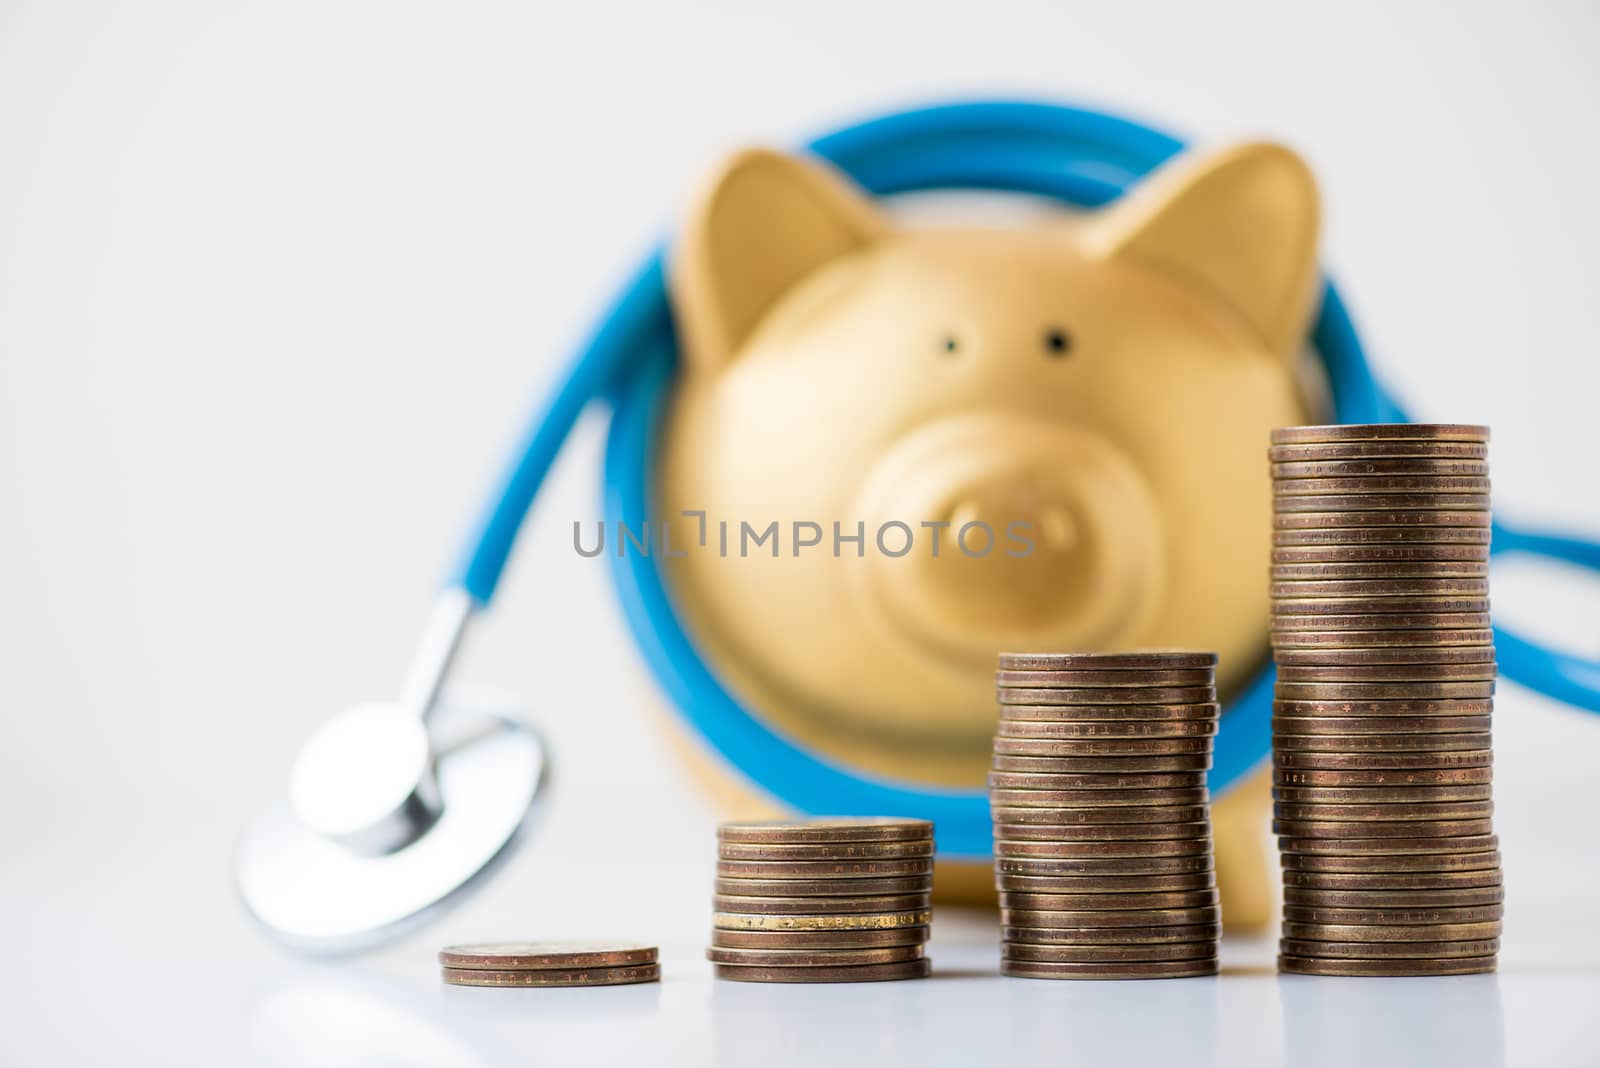 piggy bank with stethoscope and coins stack on white background by Lerttanapunyaporn